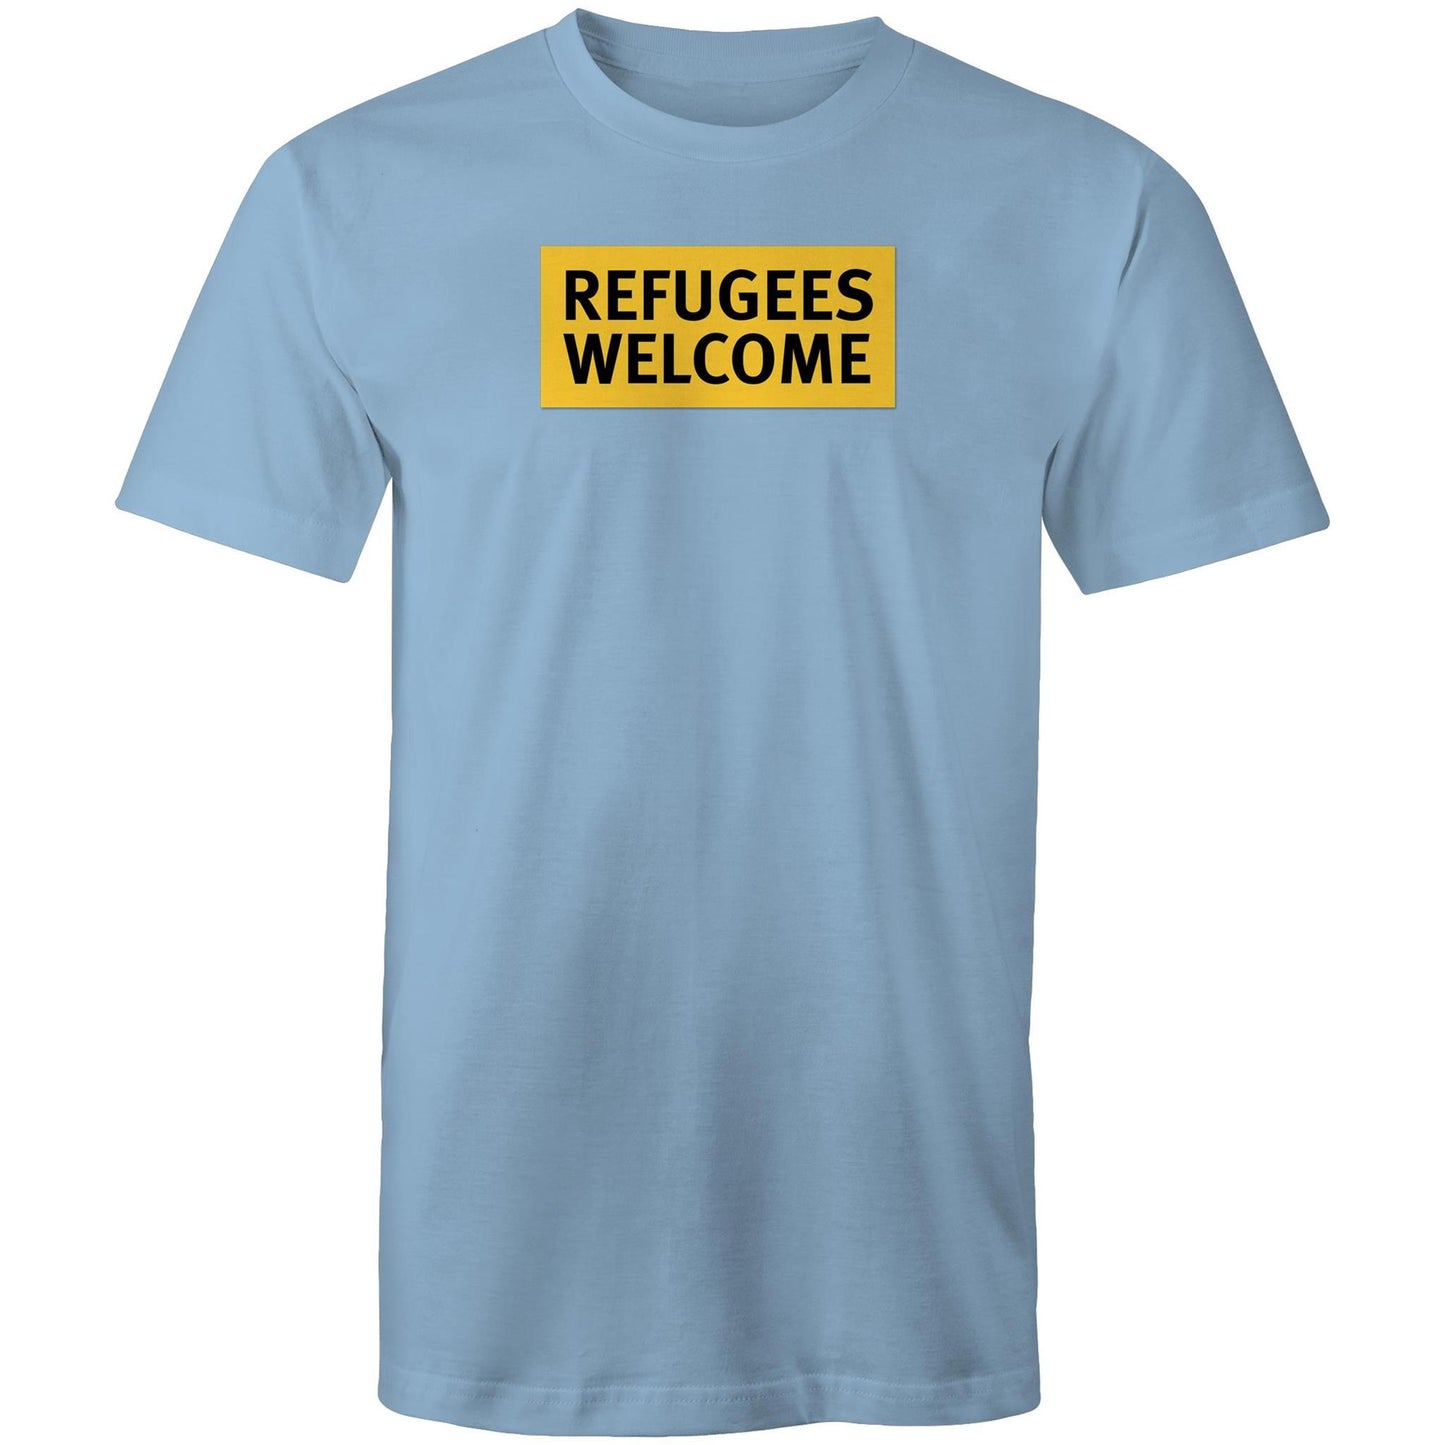 Refugees Welcome T Shirts for Men (Unisex)